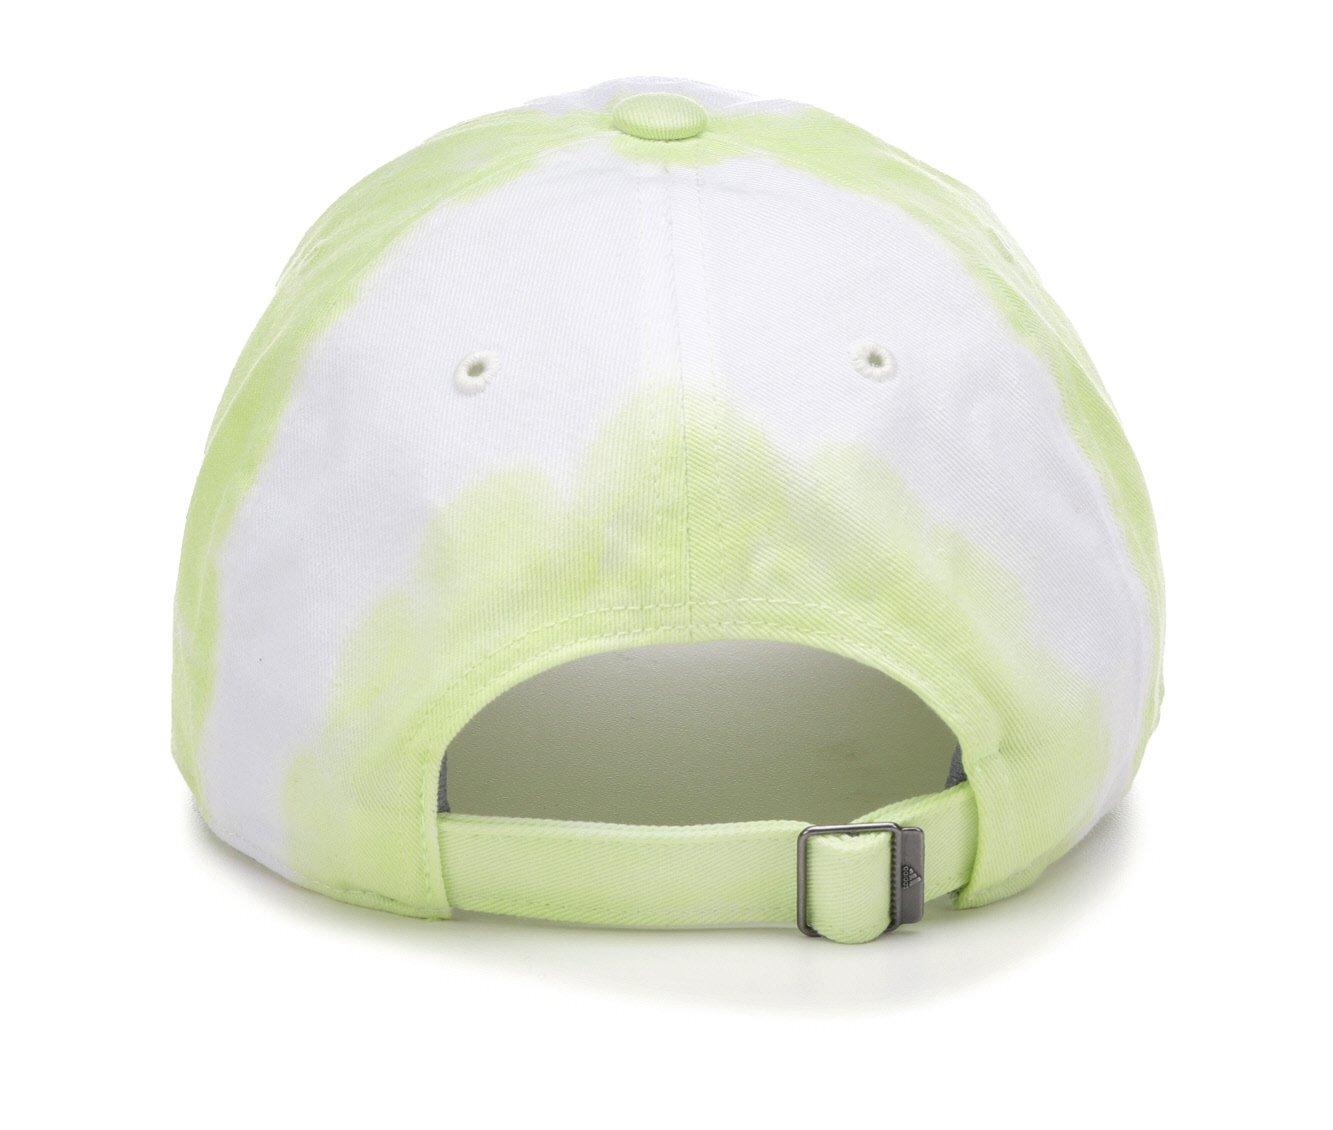 Adidas Women's Relaxed Color Wash Cap